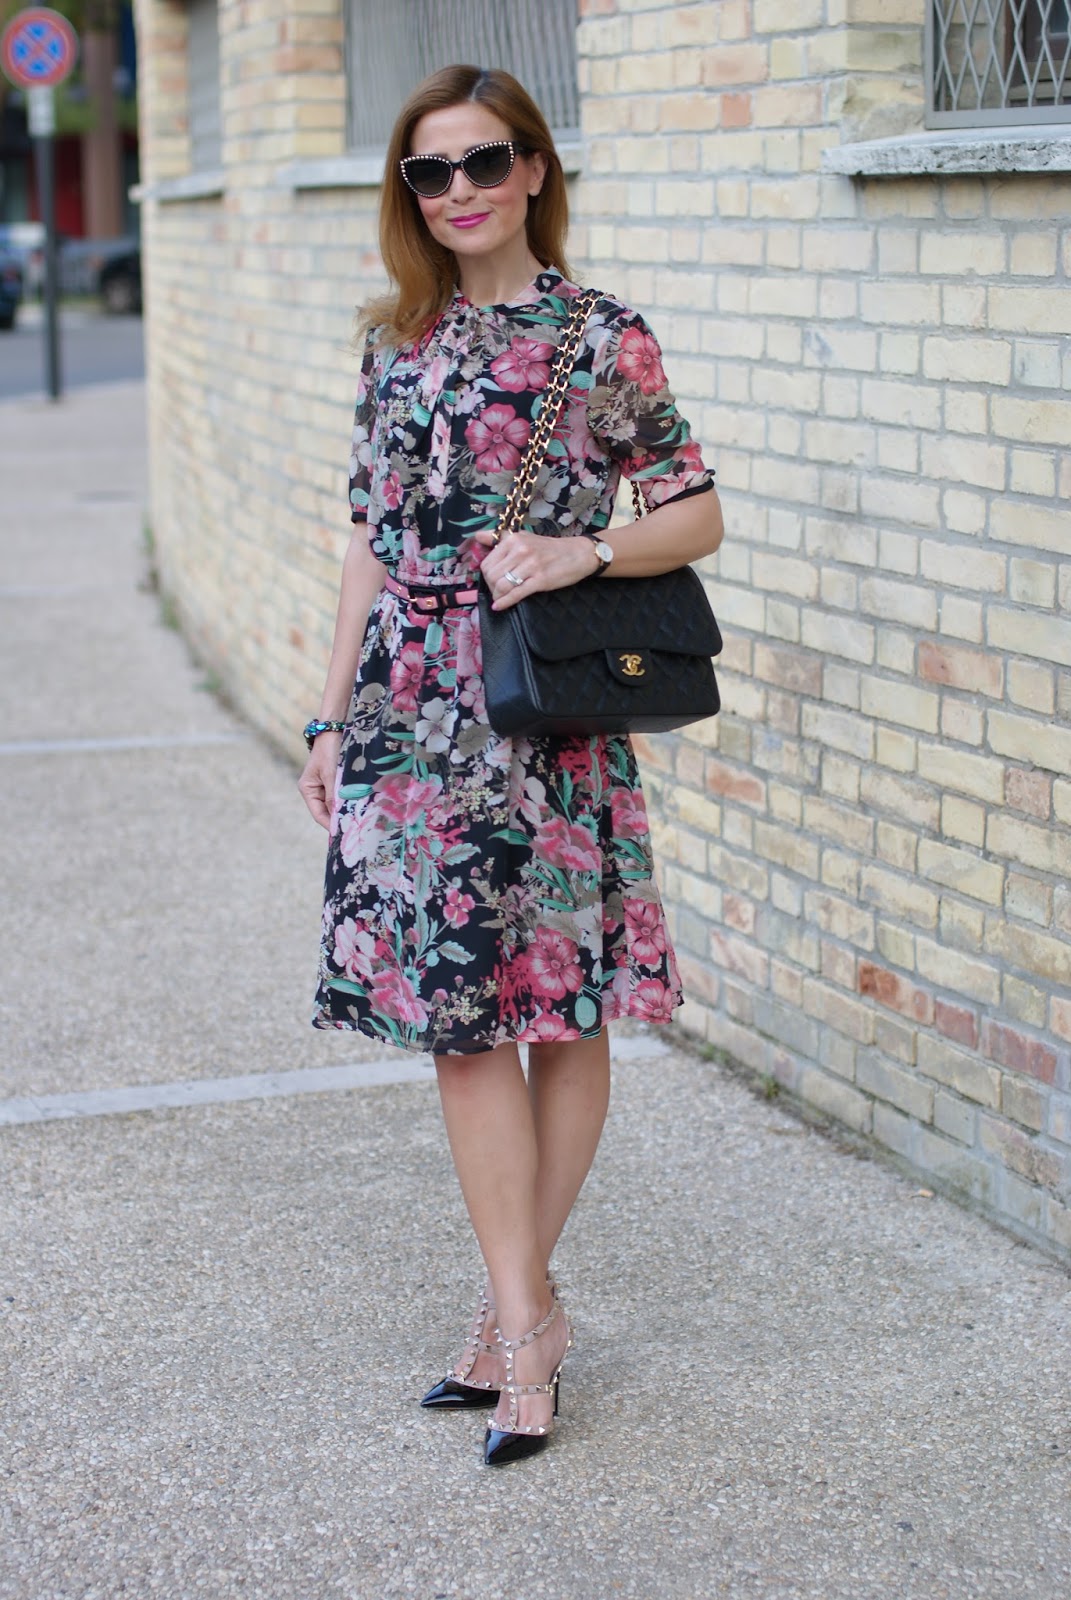 Floral bon ton dress with Valentino Rockstud heels and Chanel bag on Fashion and Cookies fashion blog, fashion blogger style